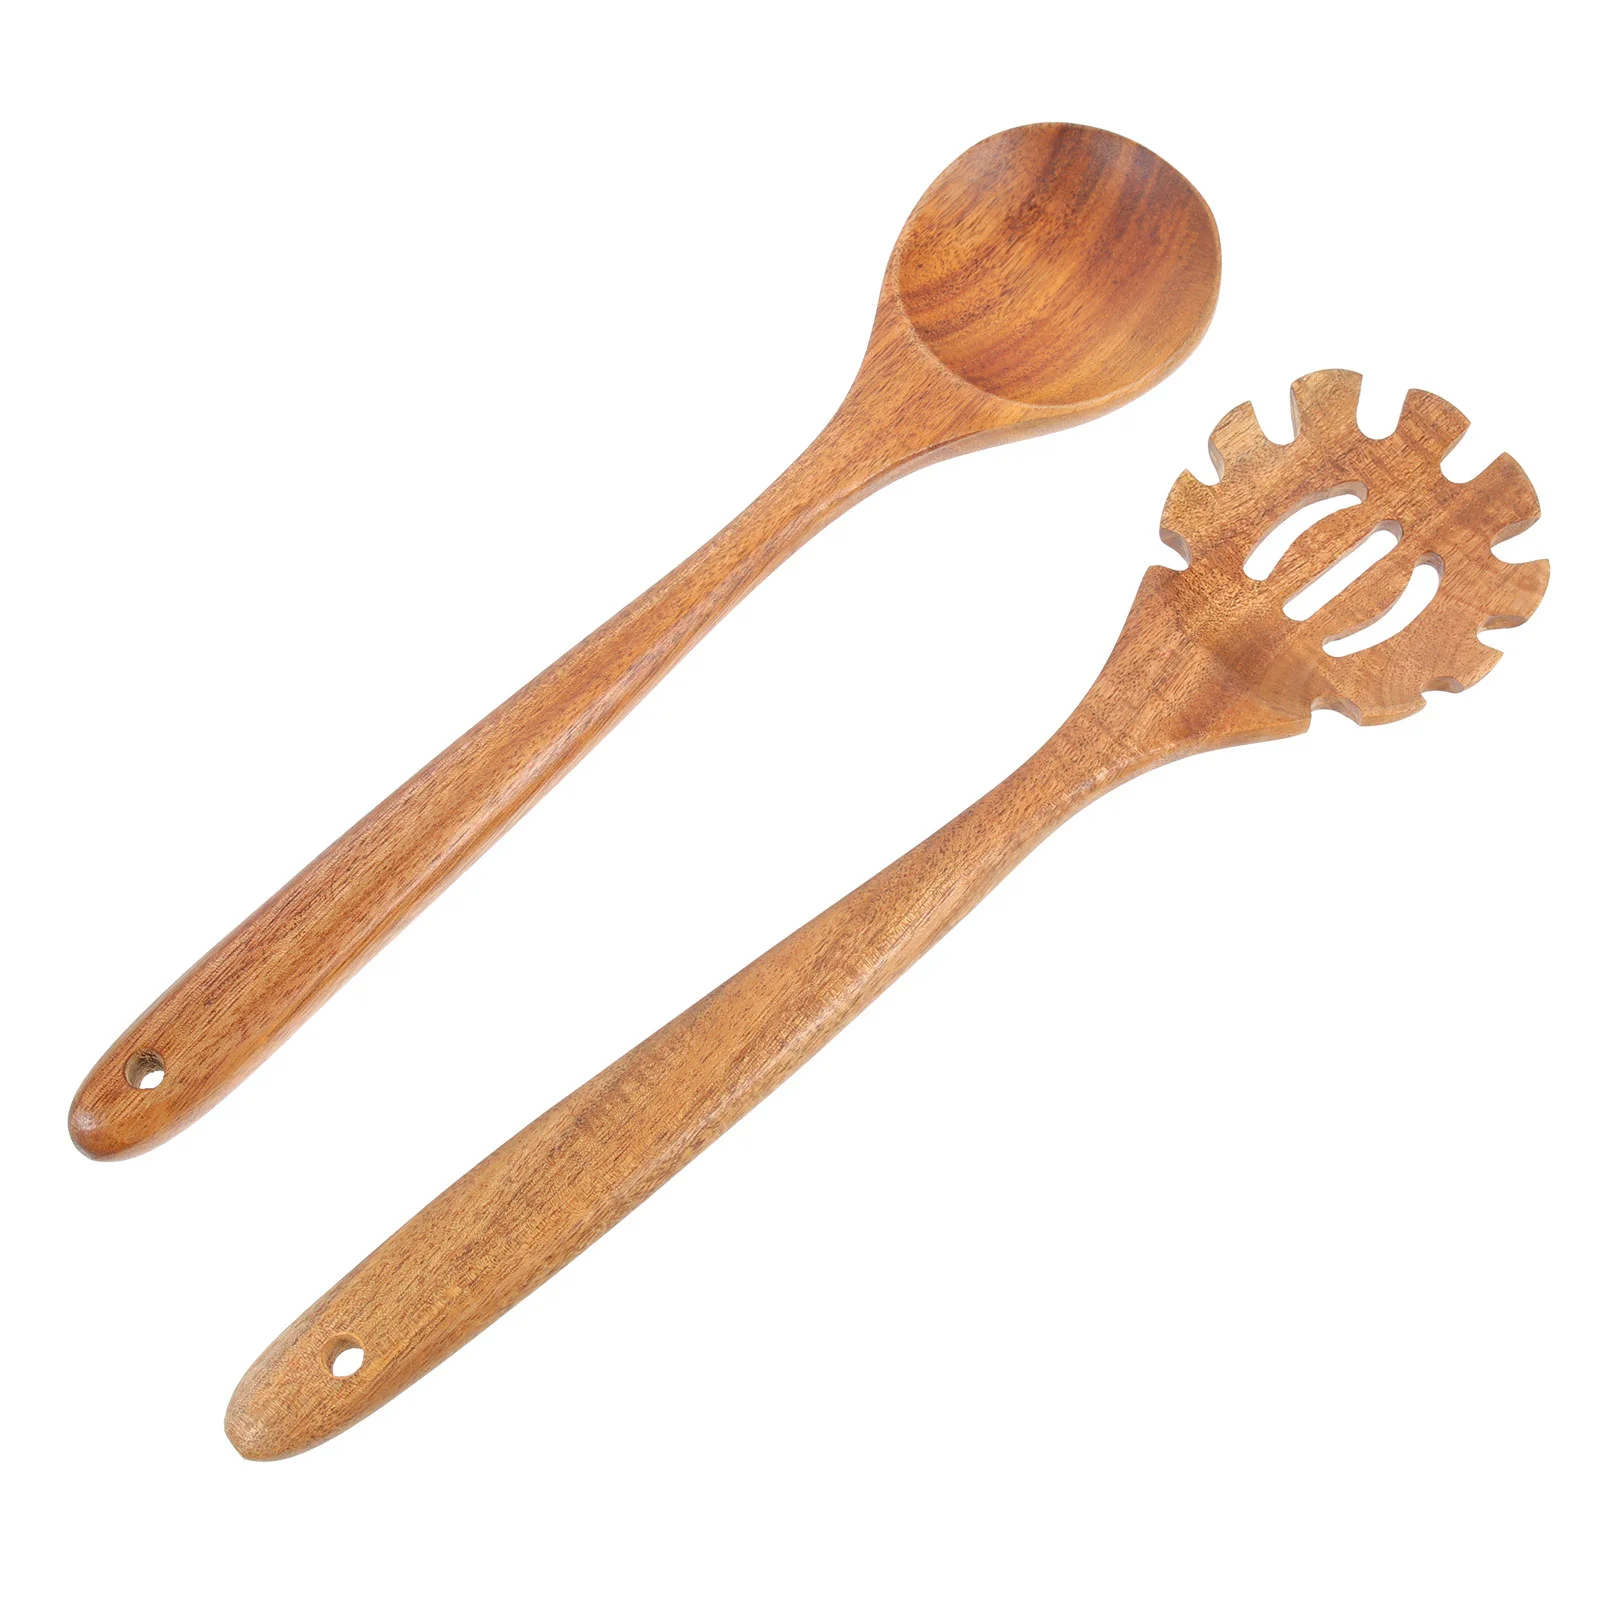 

Spoon Wooden Ladle Kitchen Spaghetti Soup Cooking Pasta Spoons Serving Slotted Noodle Serverscooper Mixing Rice Scoop Utensils